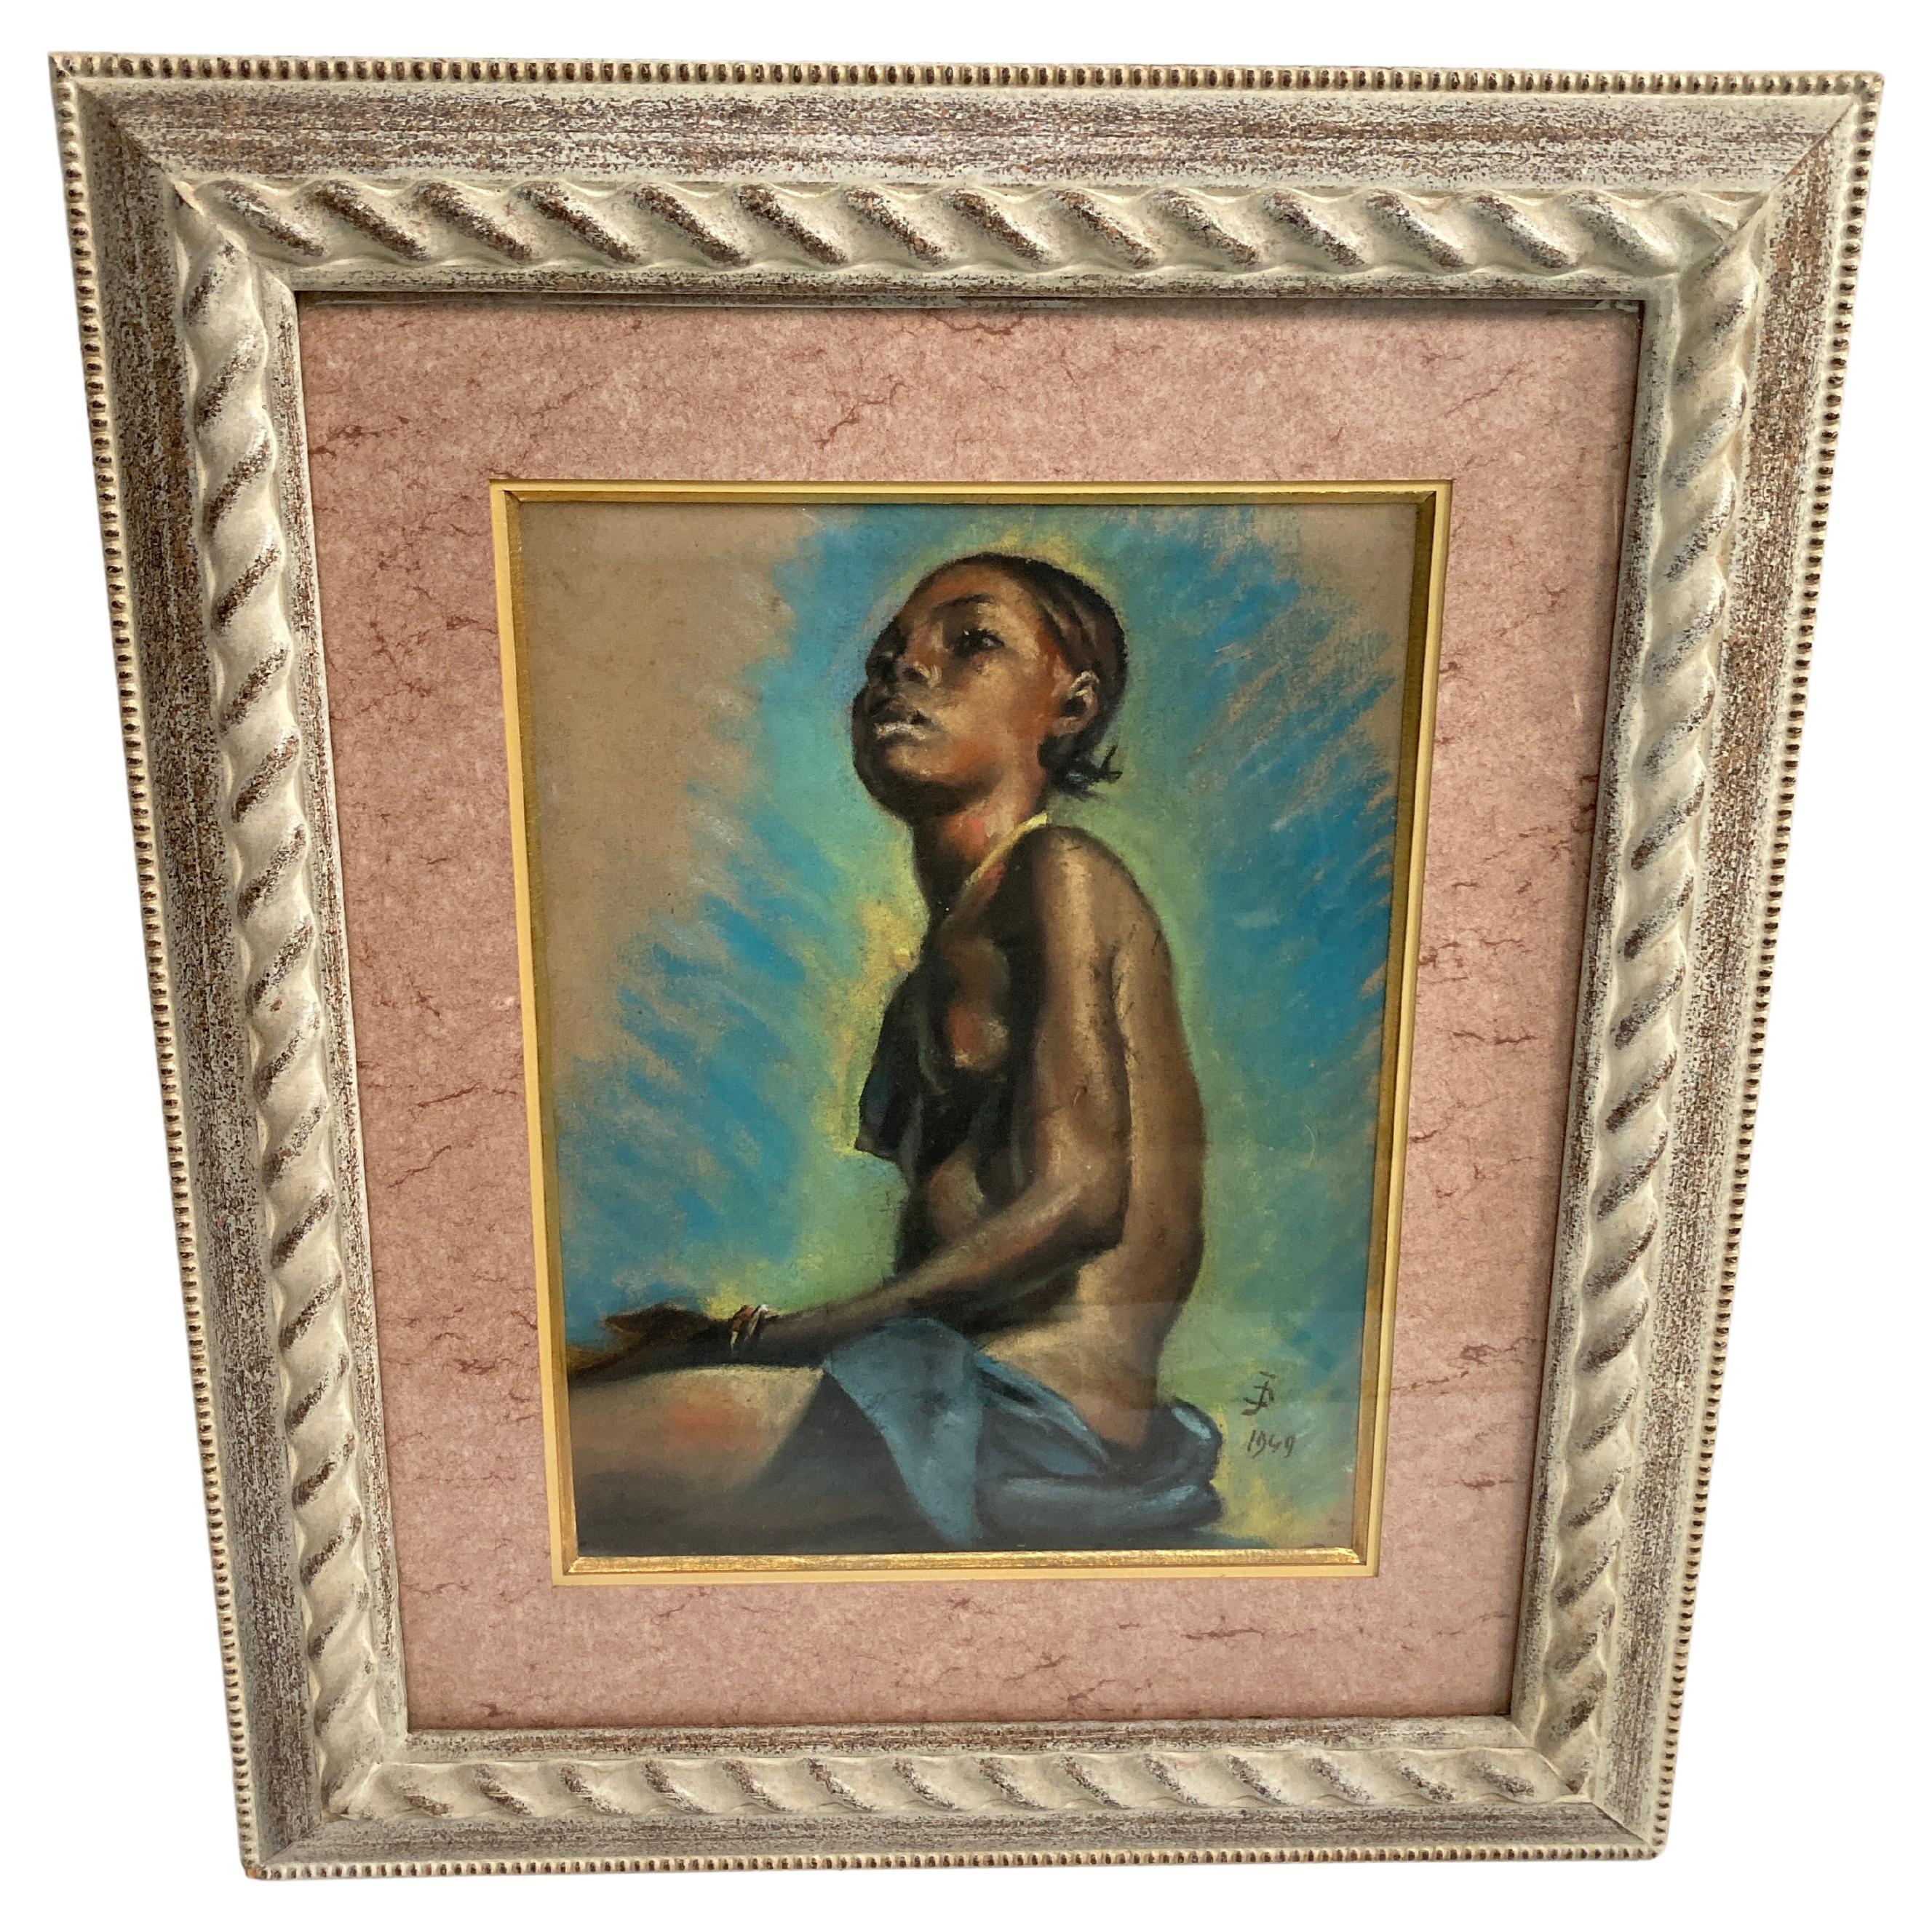 1950's pastel drawing showing a young African woman